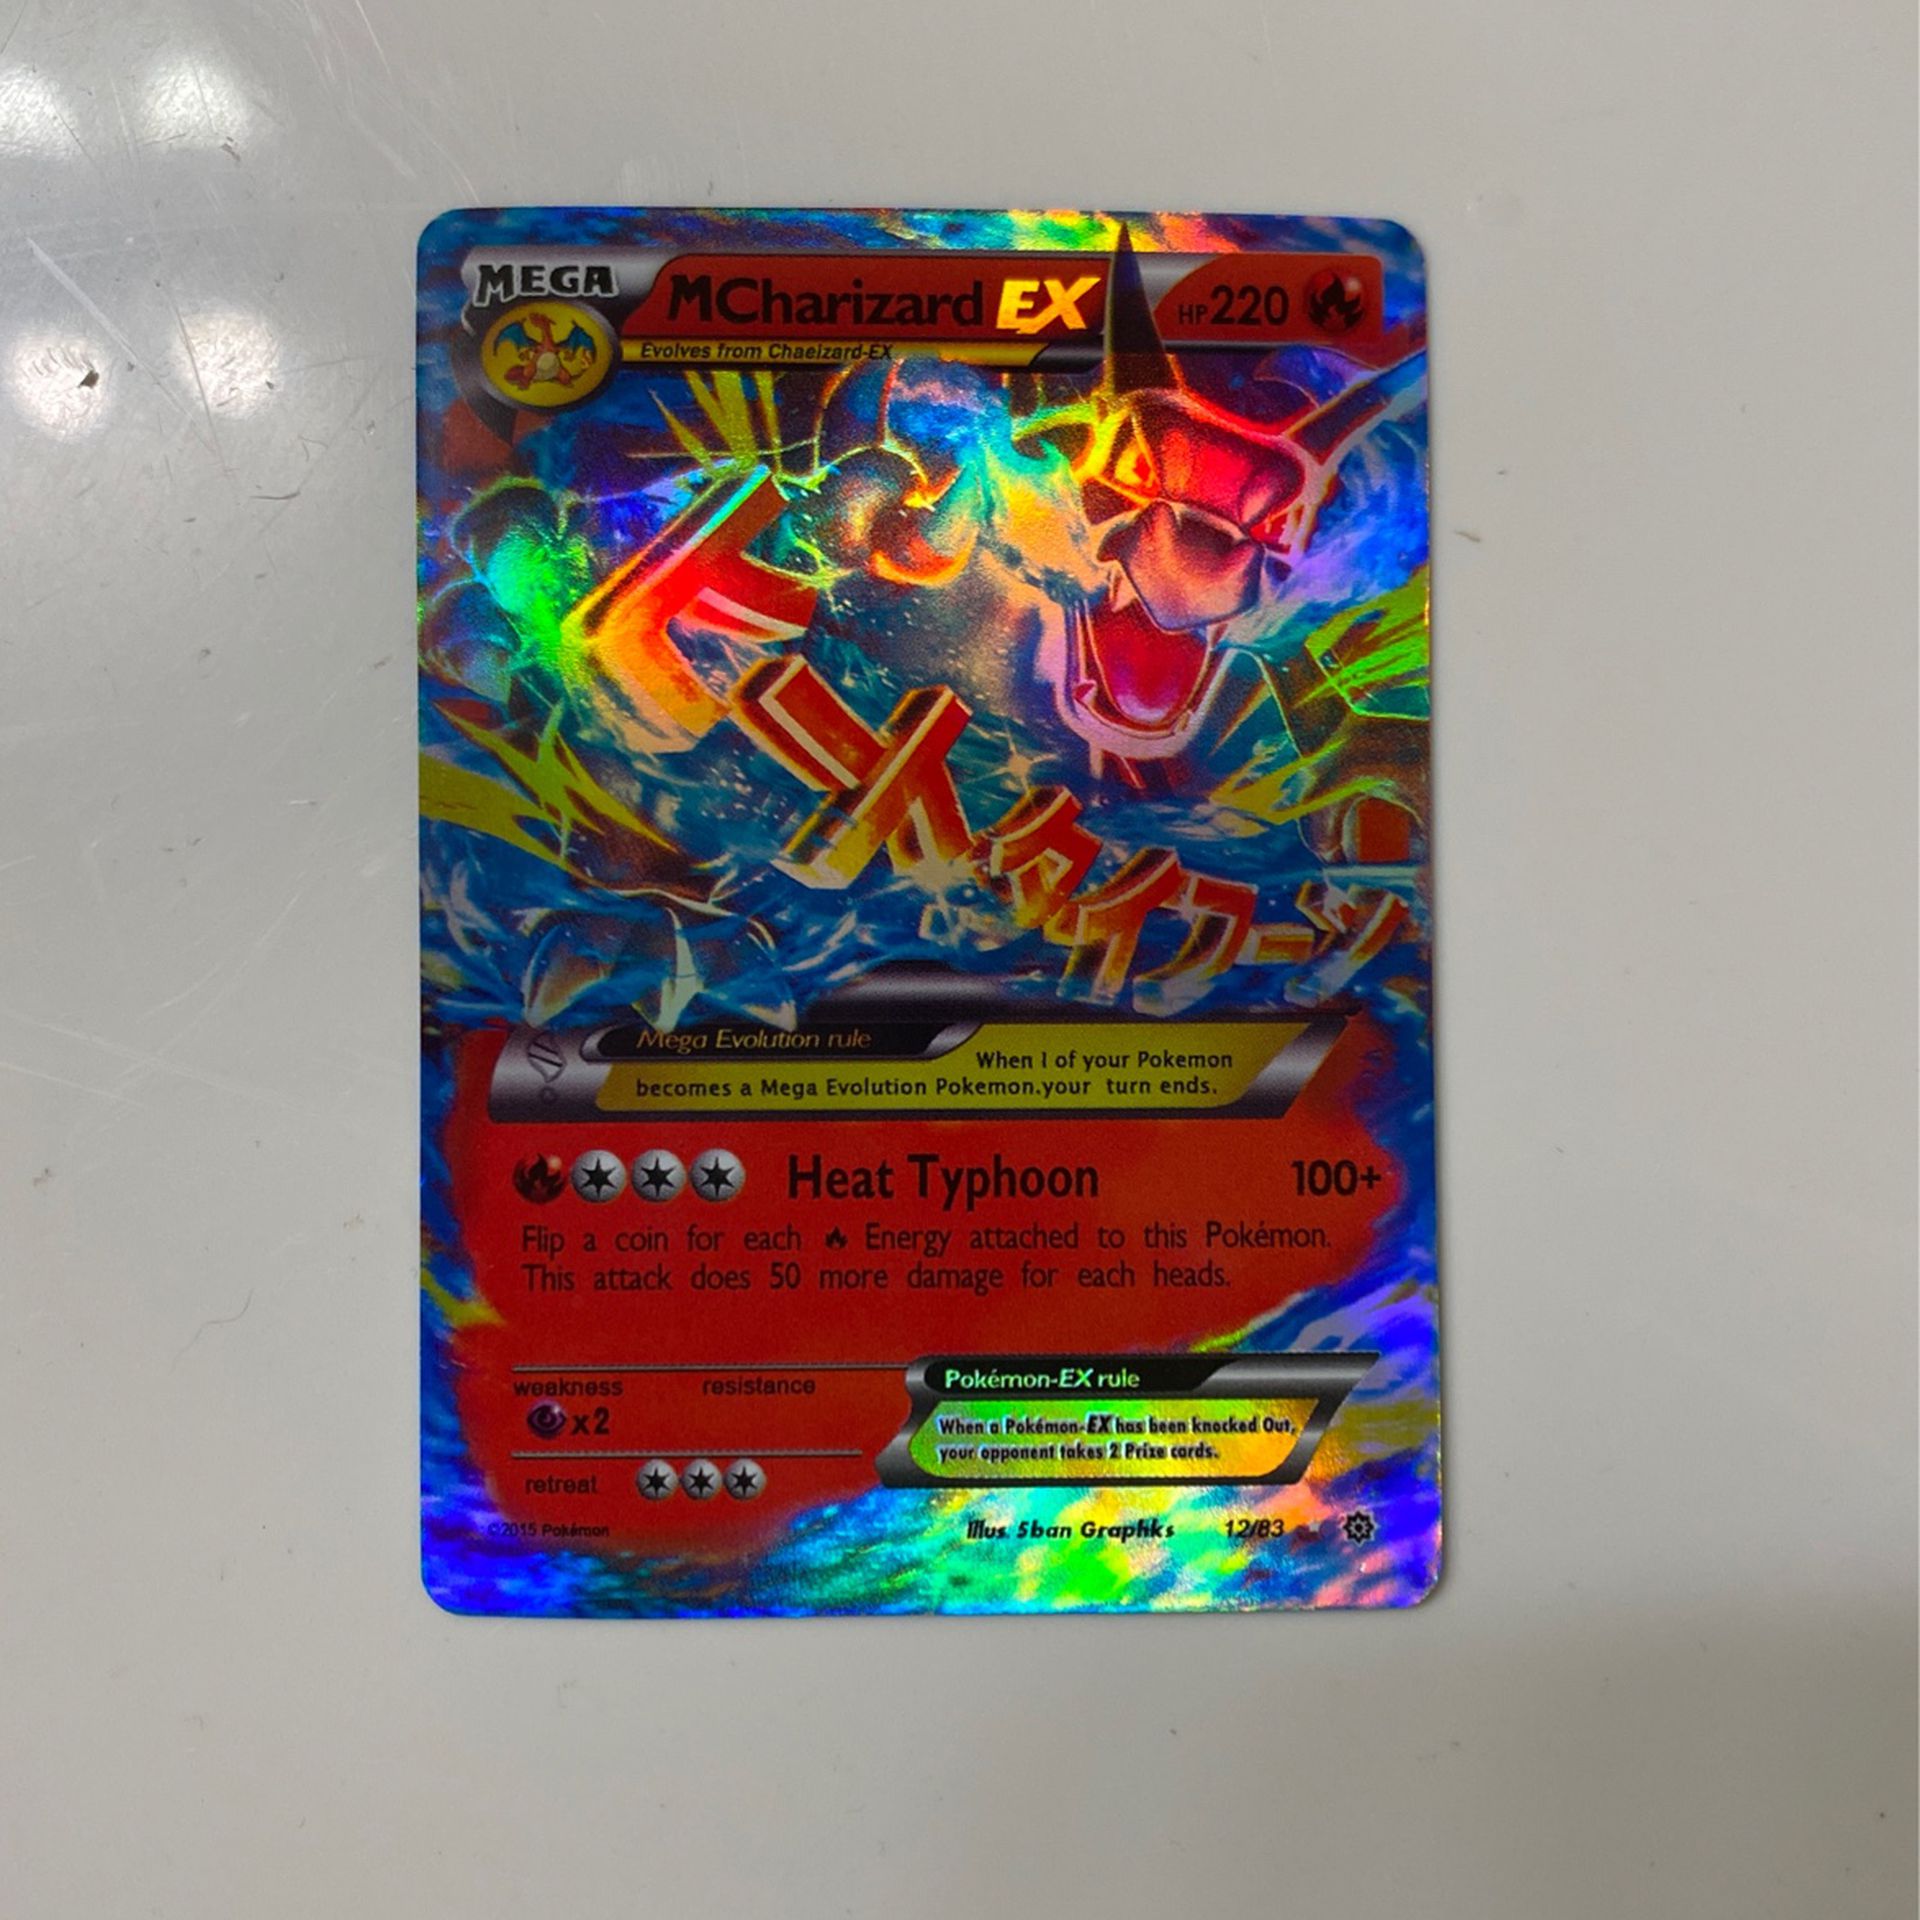 Charizard Level X SP for Sale in Long Beach, CA - OfferUp